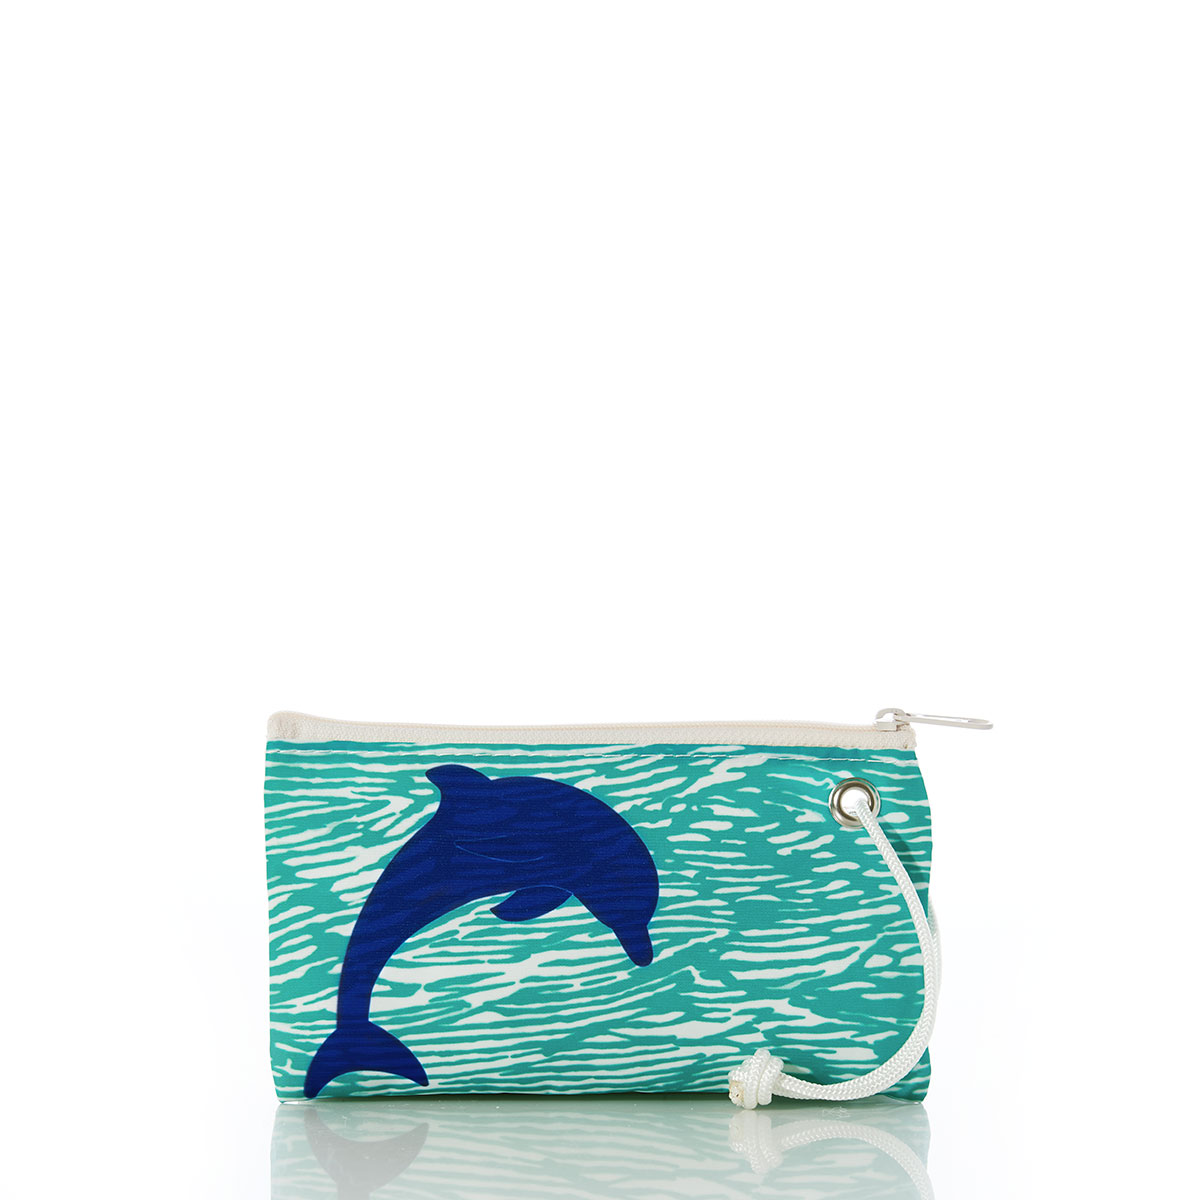 a curved blue dolphin sits on aquamarine waves printed on a recycled sail cloth wristlet with a navy zipper and wristlet strap